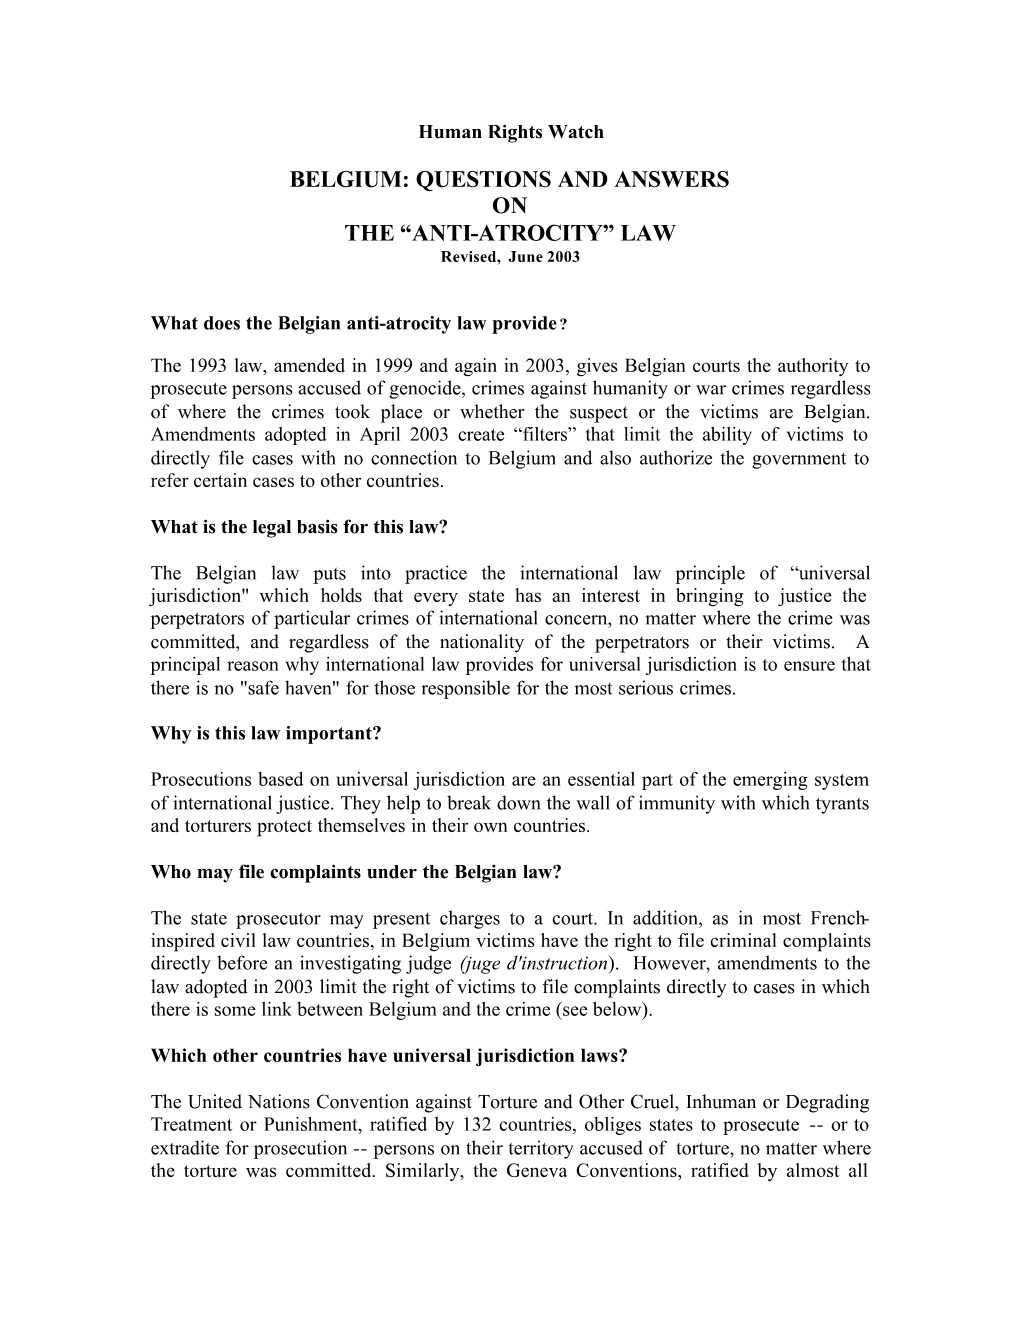 BELGIUM: QUESTIONS and ANSWERS on the “ANTI-ATROCITY” LAW Revised, June 2003